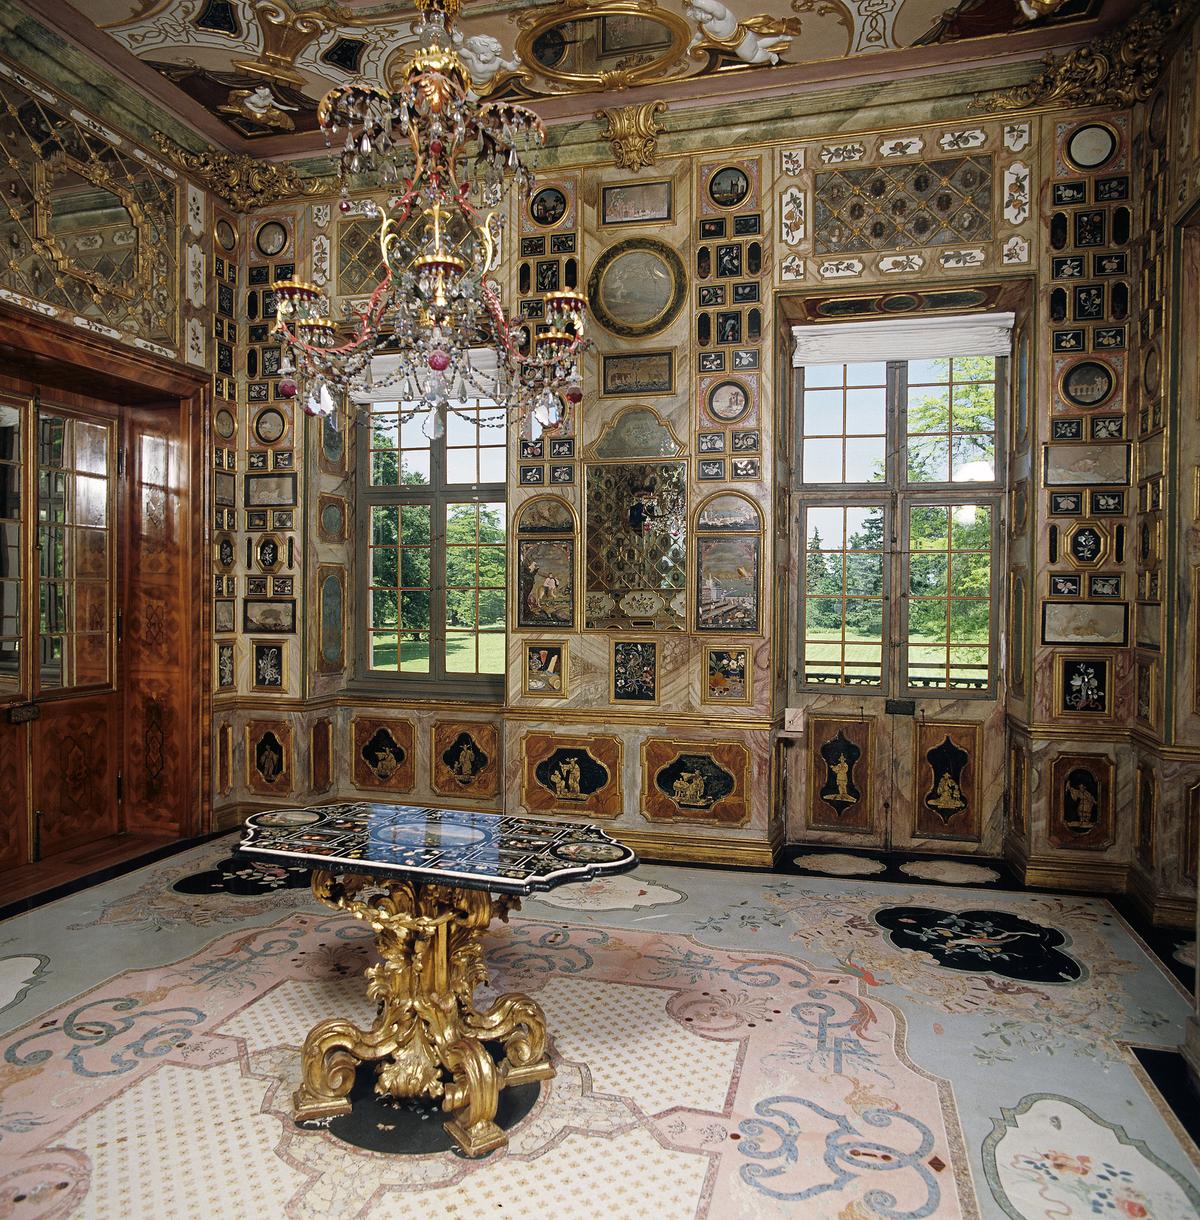 <span style="font-weight: 400;">The Florentine cabinet is the most famou</span><span style="font-weight: 400;">s room of the palac</span><span style="font-weight: 400;">e and features pietra dura (Italian for “hard stone”) panels, precious lapidary artwork from Florence. They are from the Cosimo III de’ Medici factory in Tuscany, Italy. Paper-thin plates made of marble, granite, and semiprecious stone were formed into 758 panels of bright illustrations. </span> (Hecker/Rastatt Favorite)